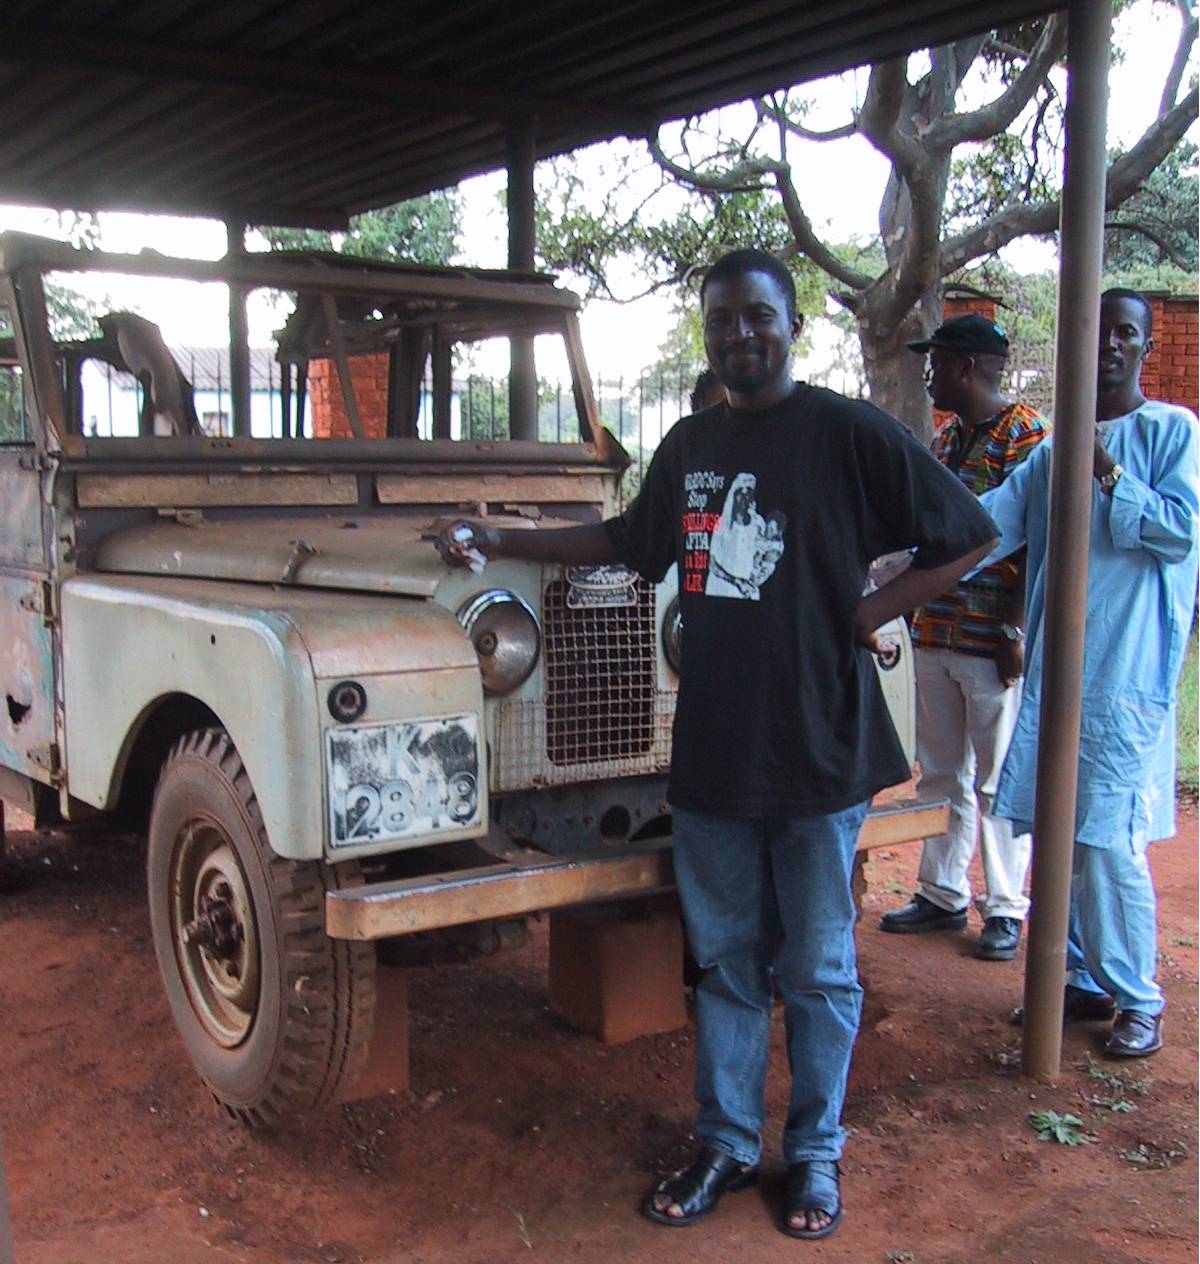 In Lusaka, Zambia April 2002, standing in front of the jeep